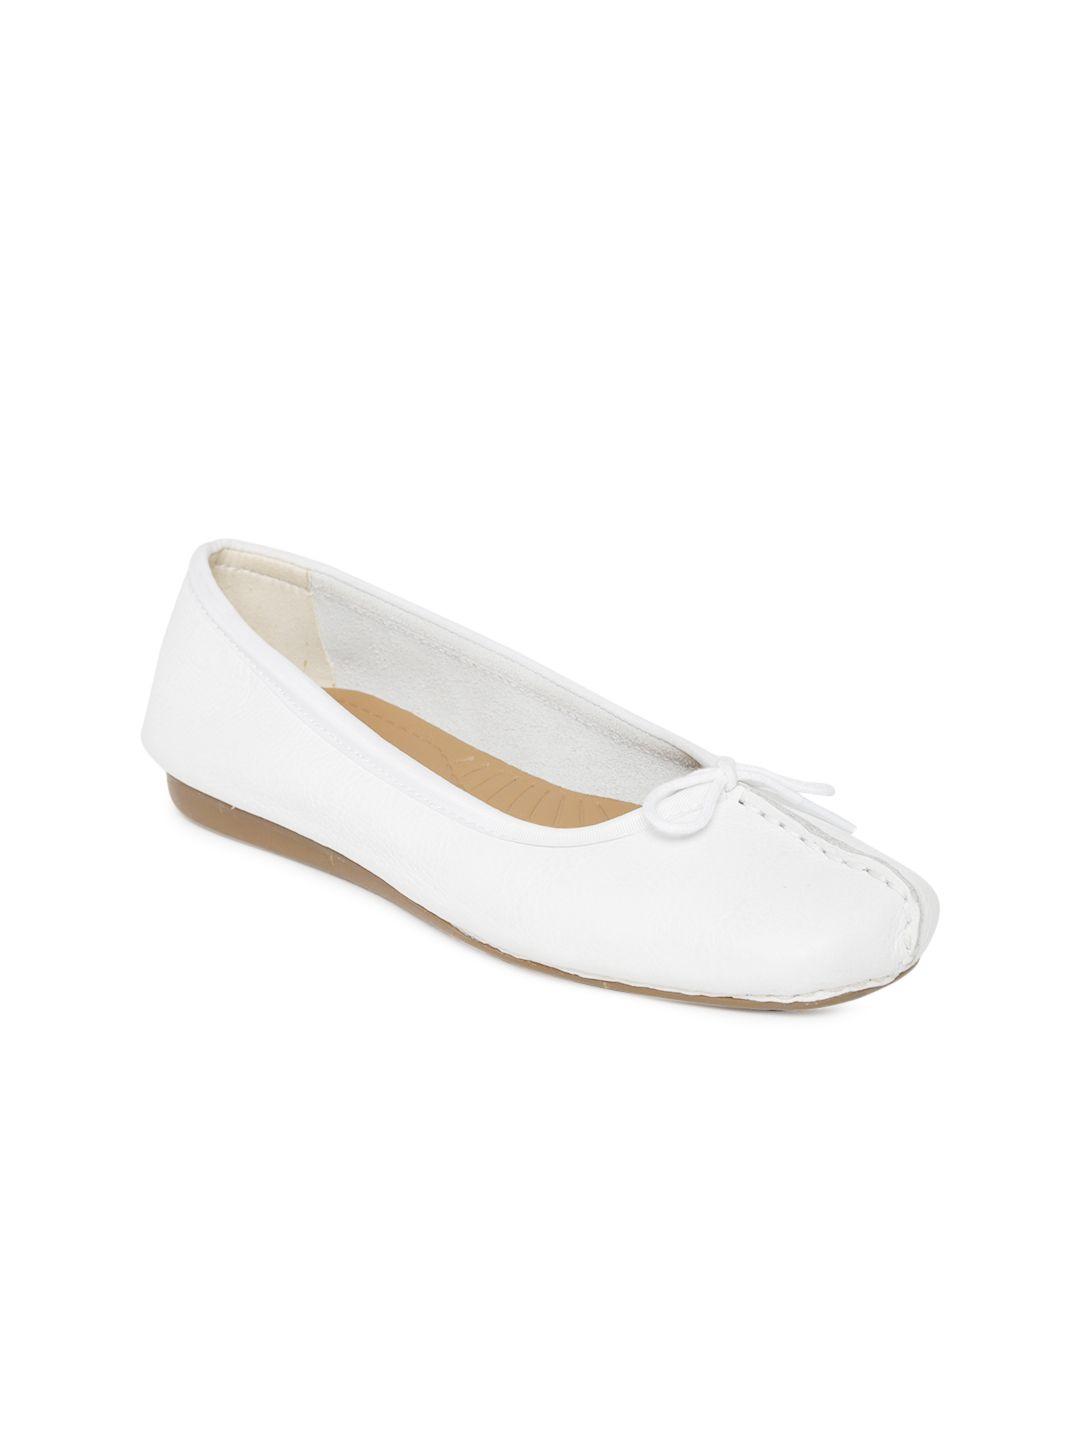 clarks women white leather flat shoes